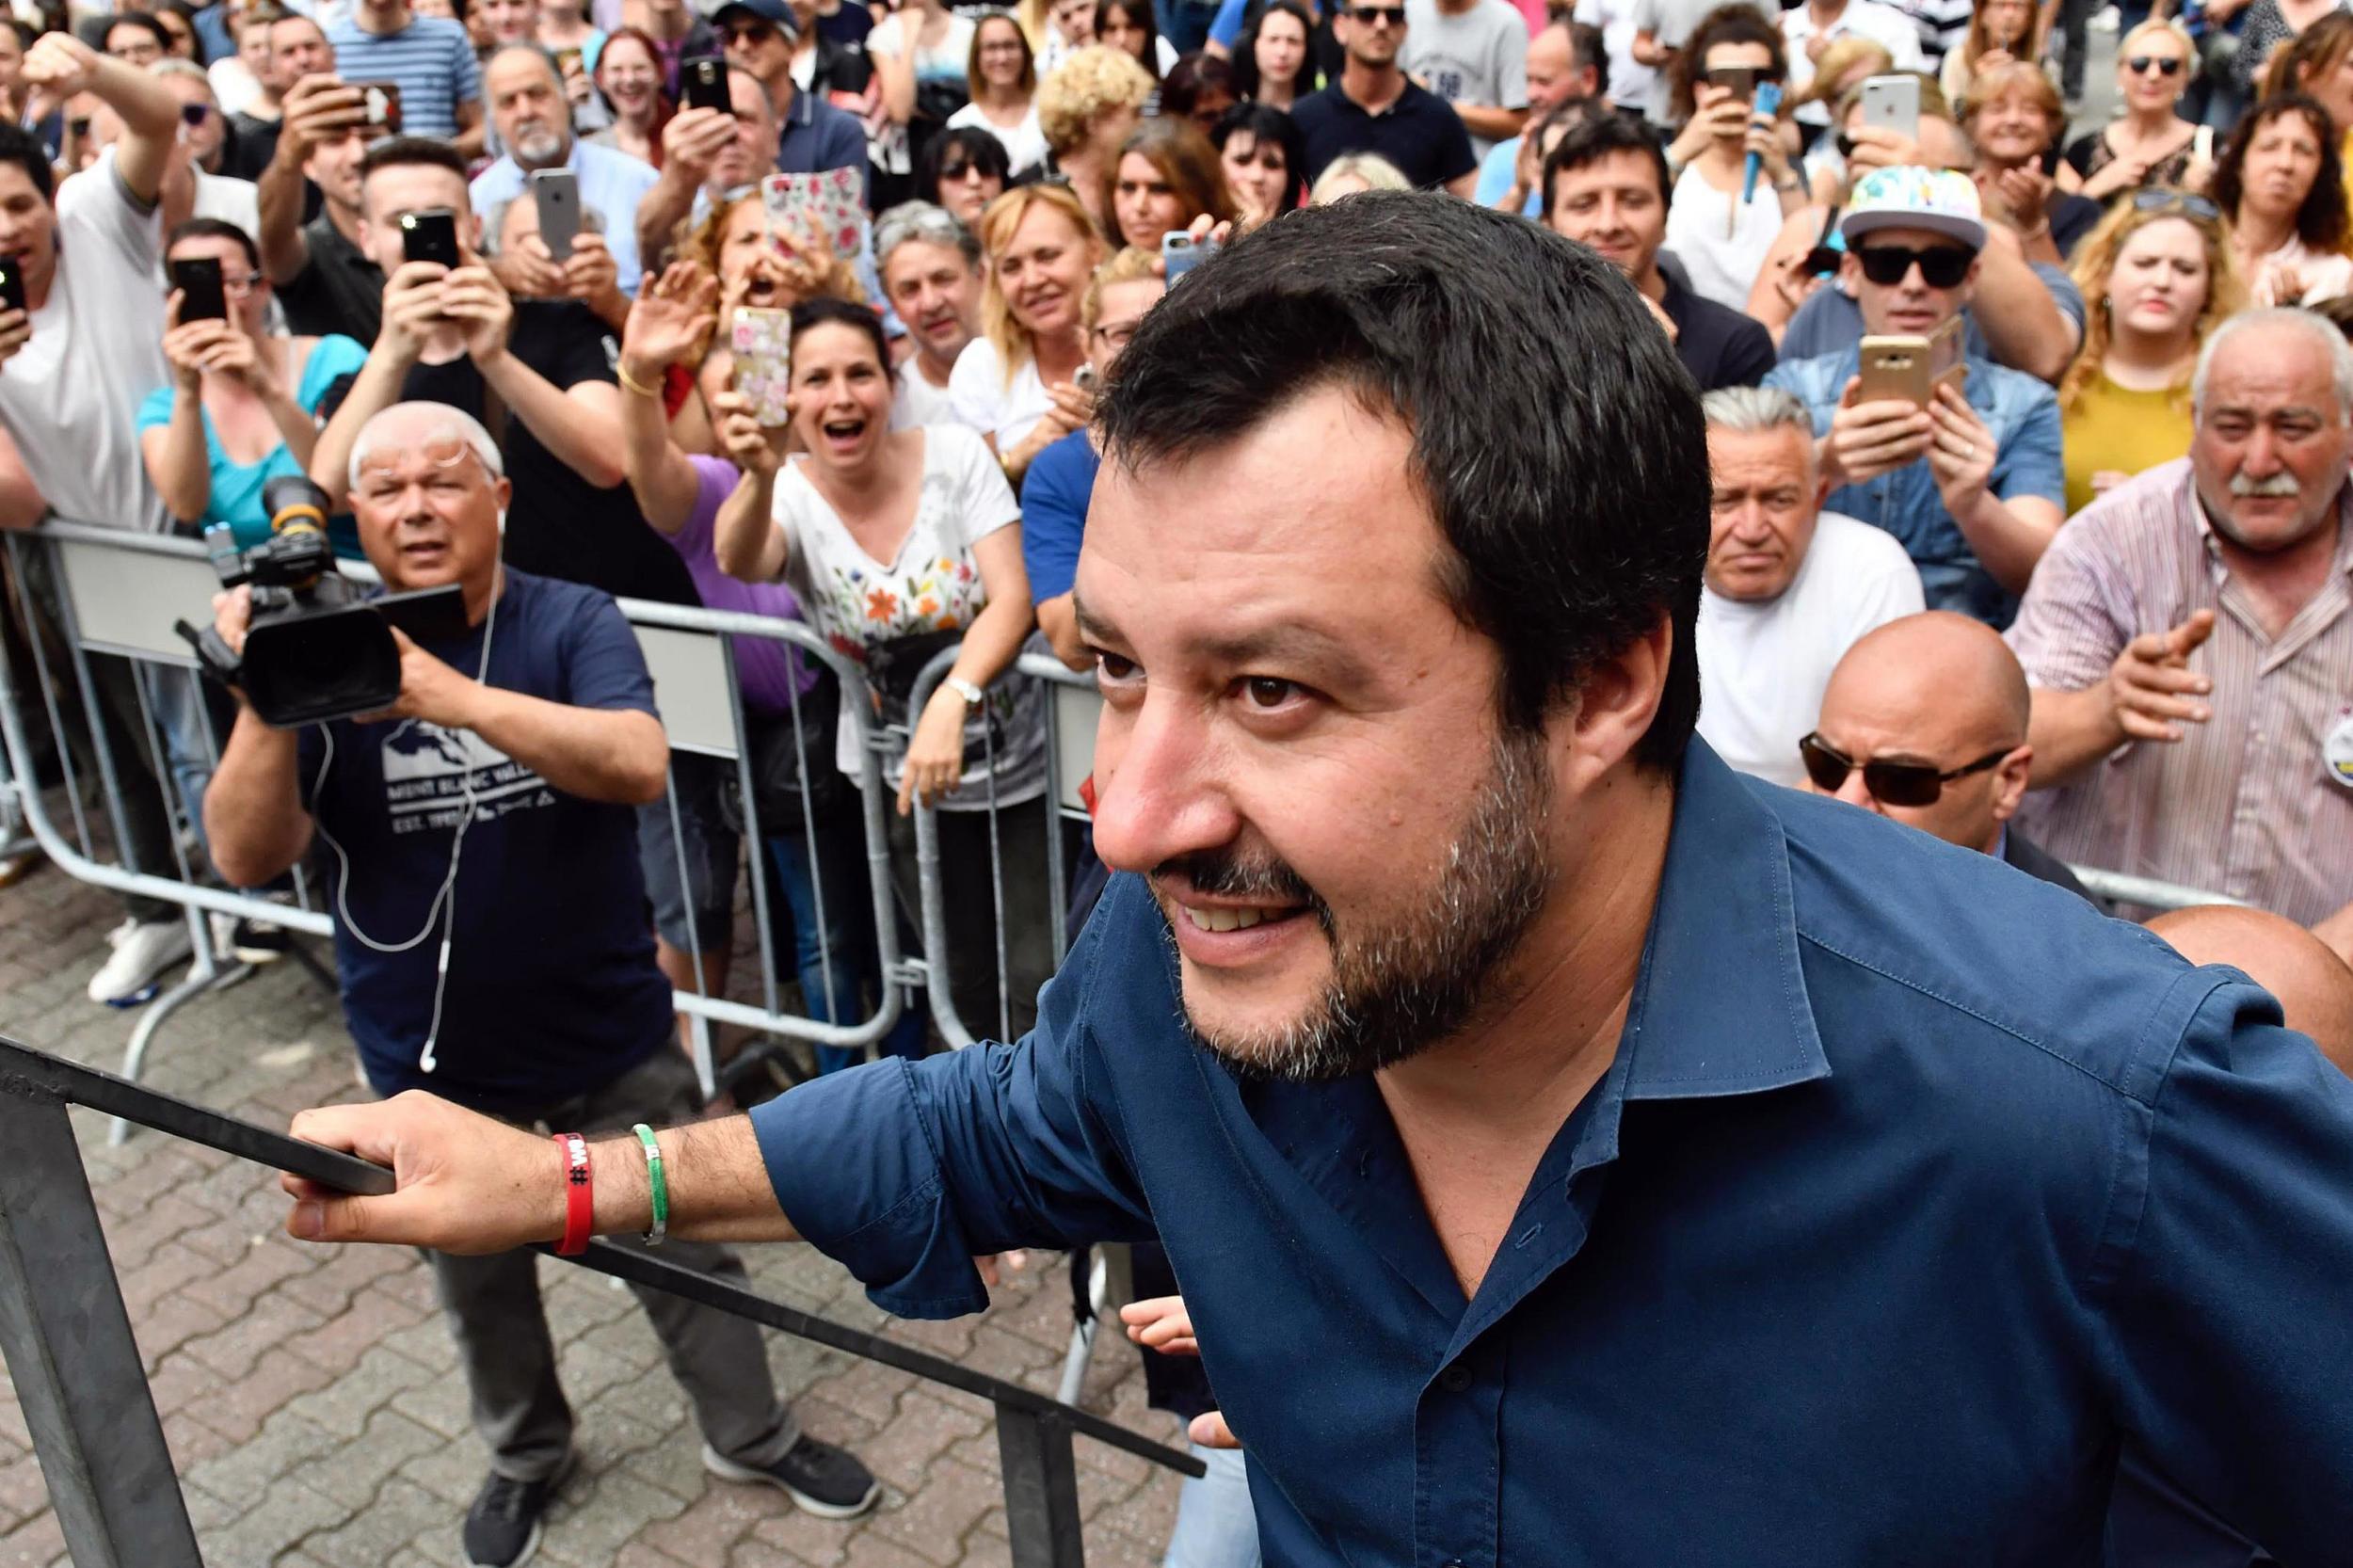 The League leader Matteo Salvini at a campaign rally yesterday for local elections - which could now be off